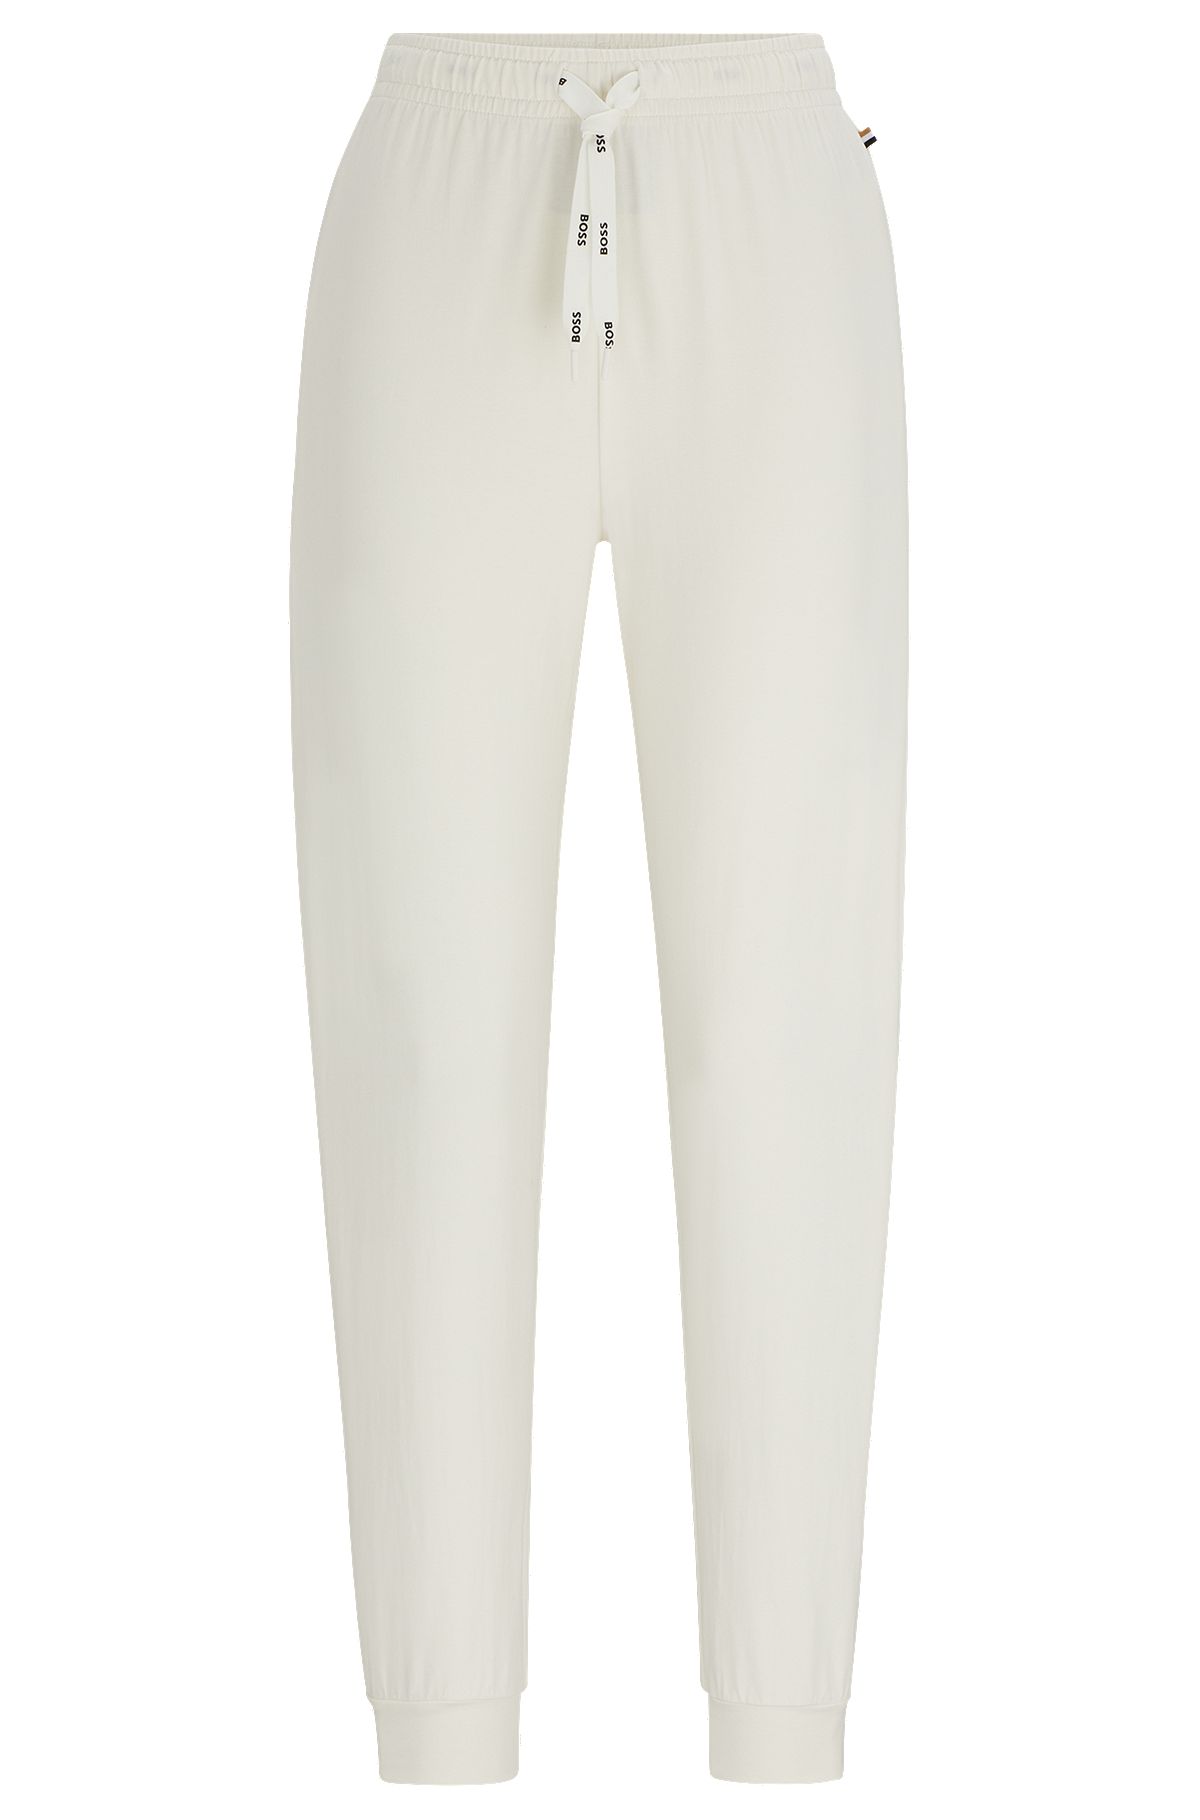 Cuffed pyjama bottoms in stretch cotton with branded drawcords, White